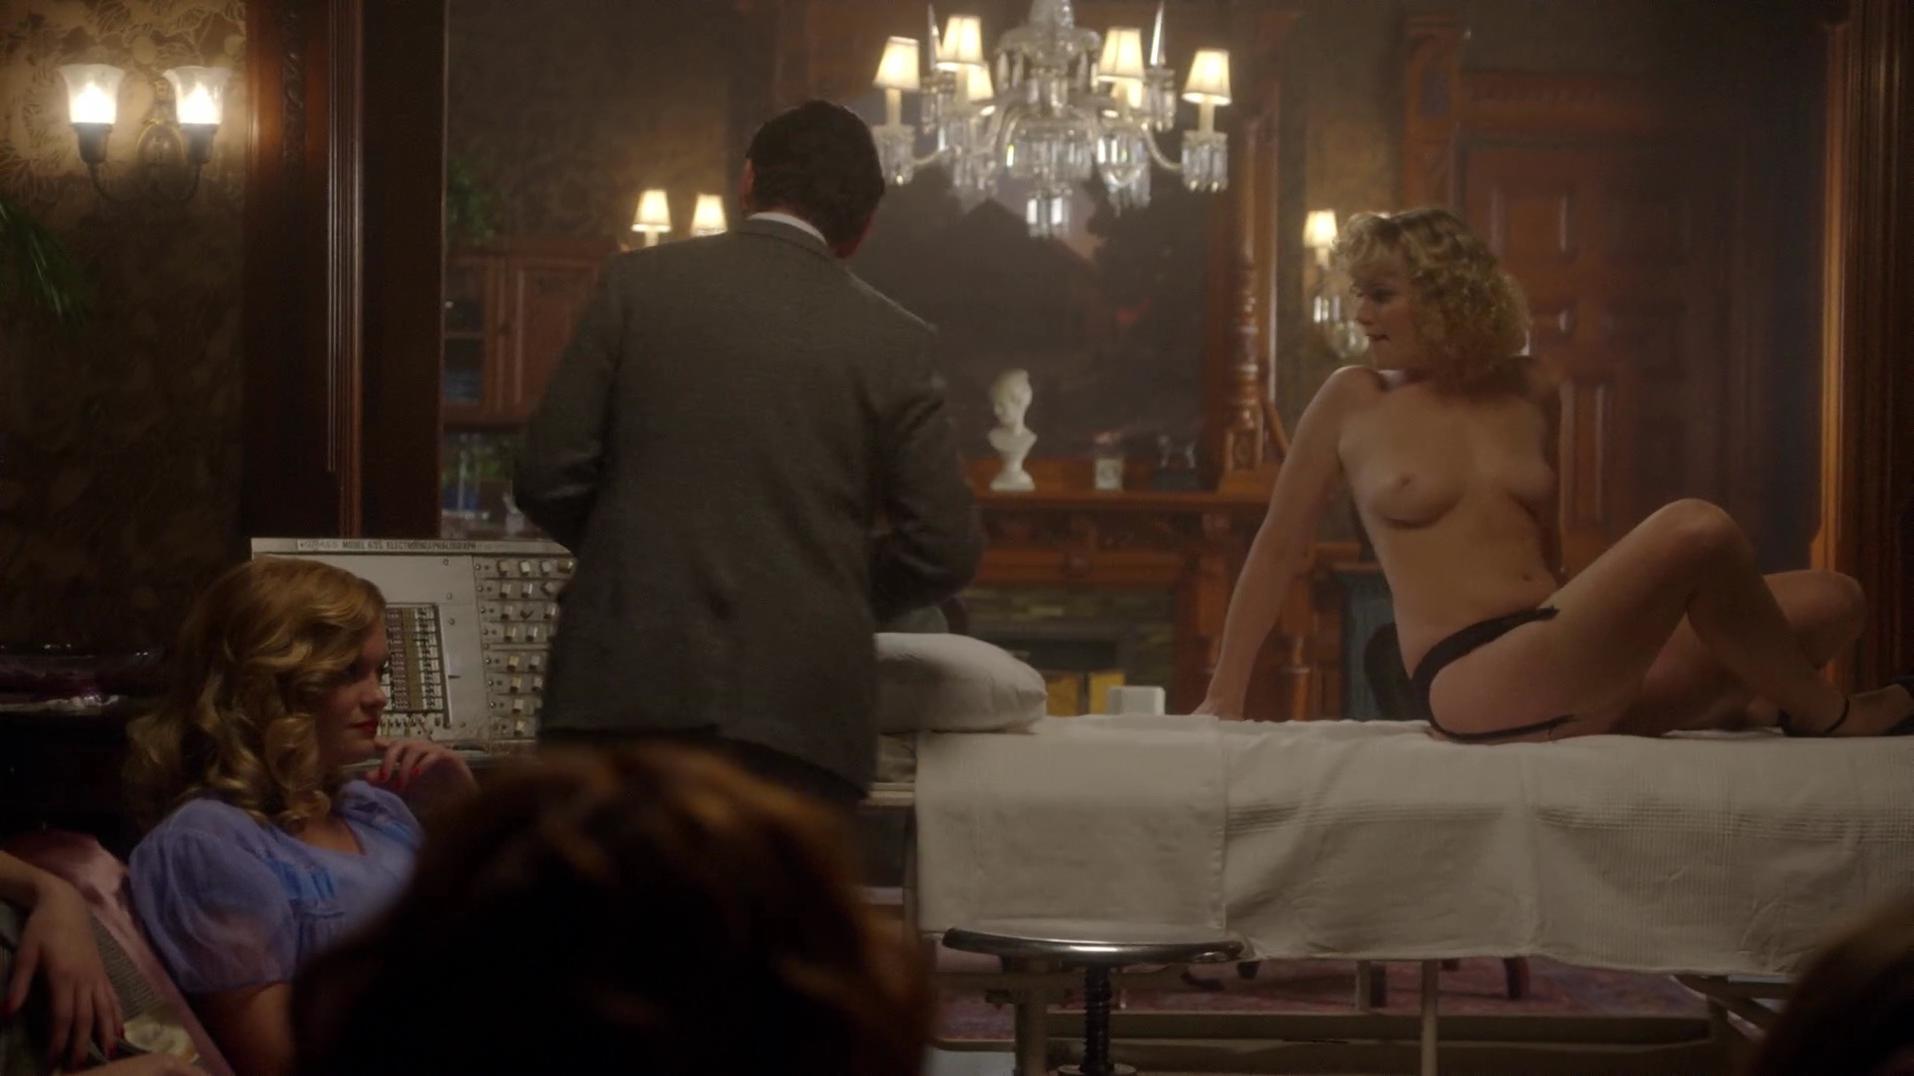 Nicholle Tom nude - Masters of Sex s01e02-03 (2013)